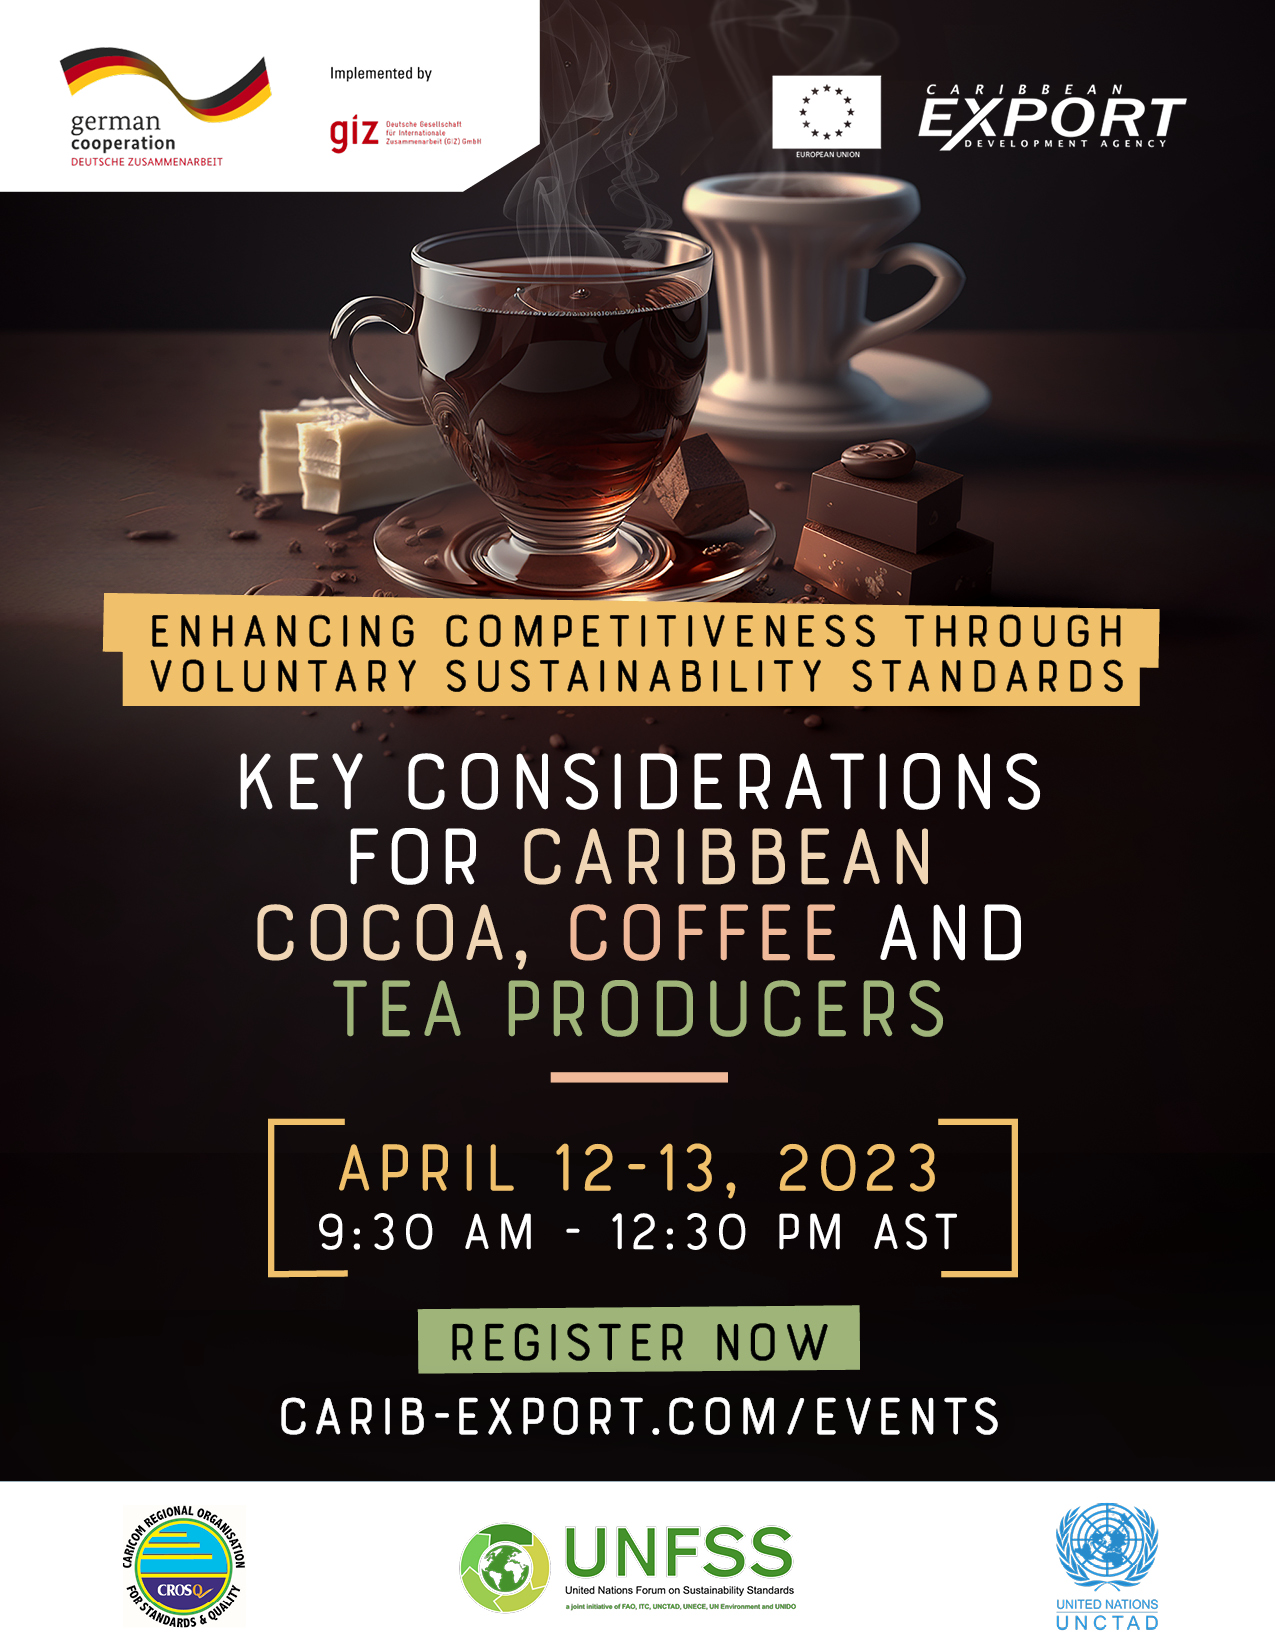 Enhancing Competitiveness through Voluntary Sustainability Standards: Key Considerations for Caribbean Cocoa, Coffee and Tea Producers